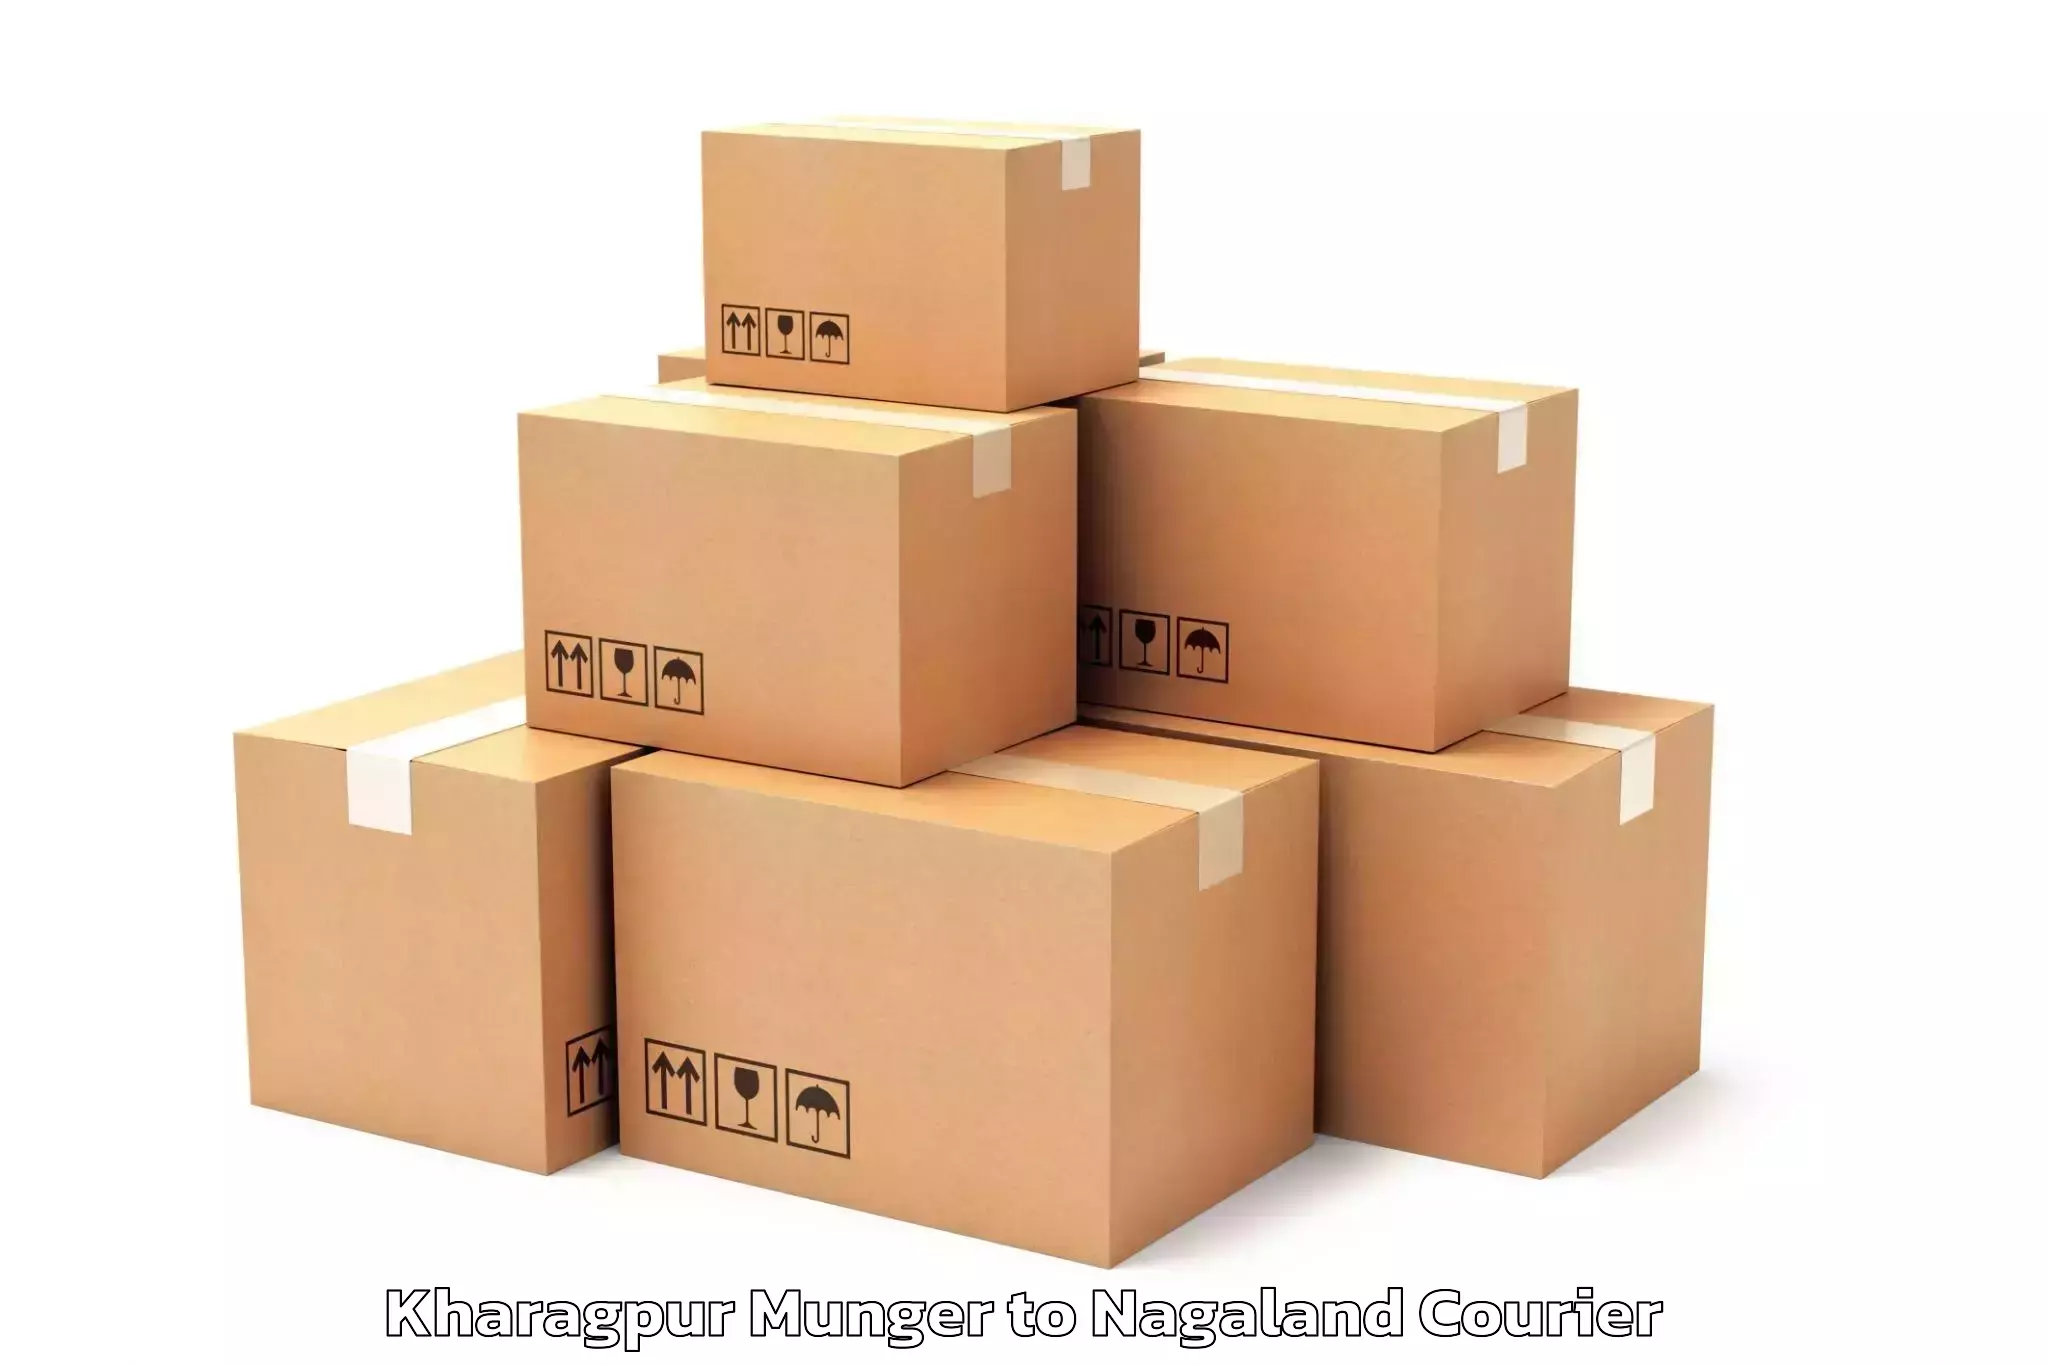 Quality moving and storage Kharagpur Munger to Dimapur